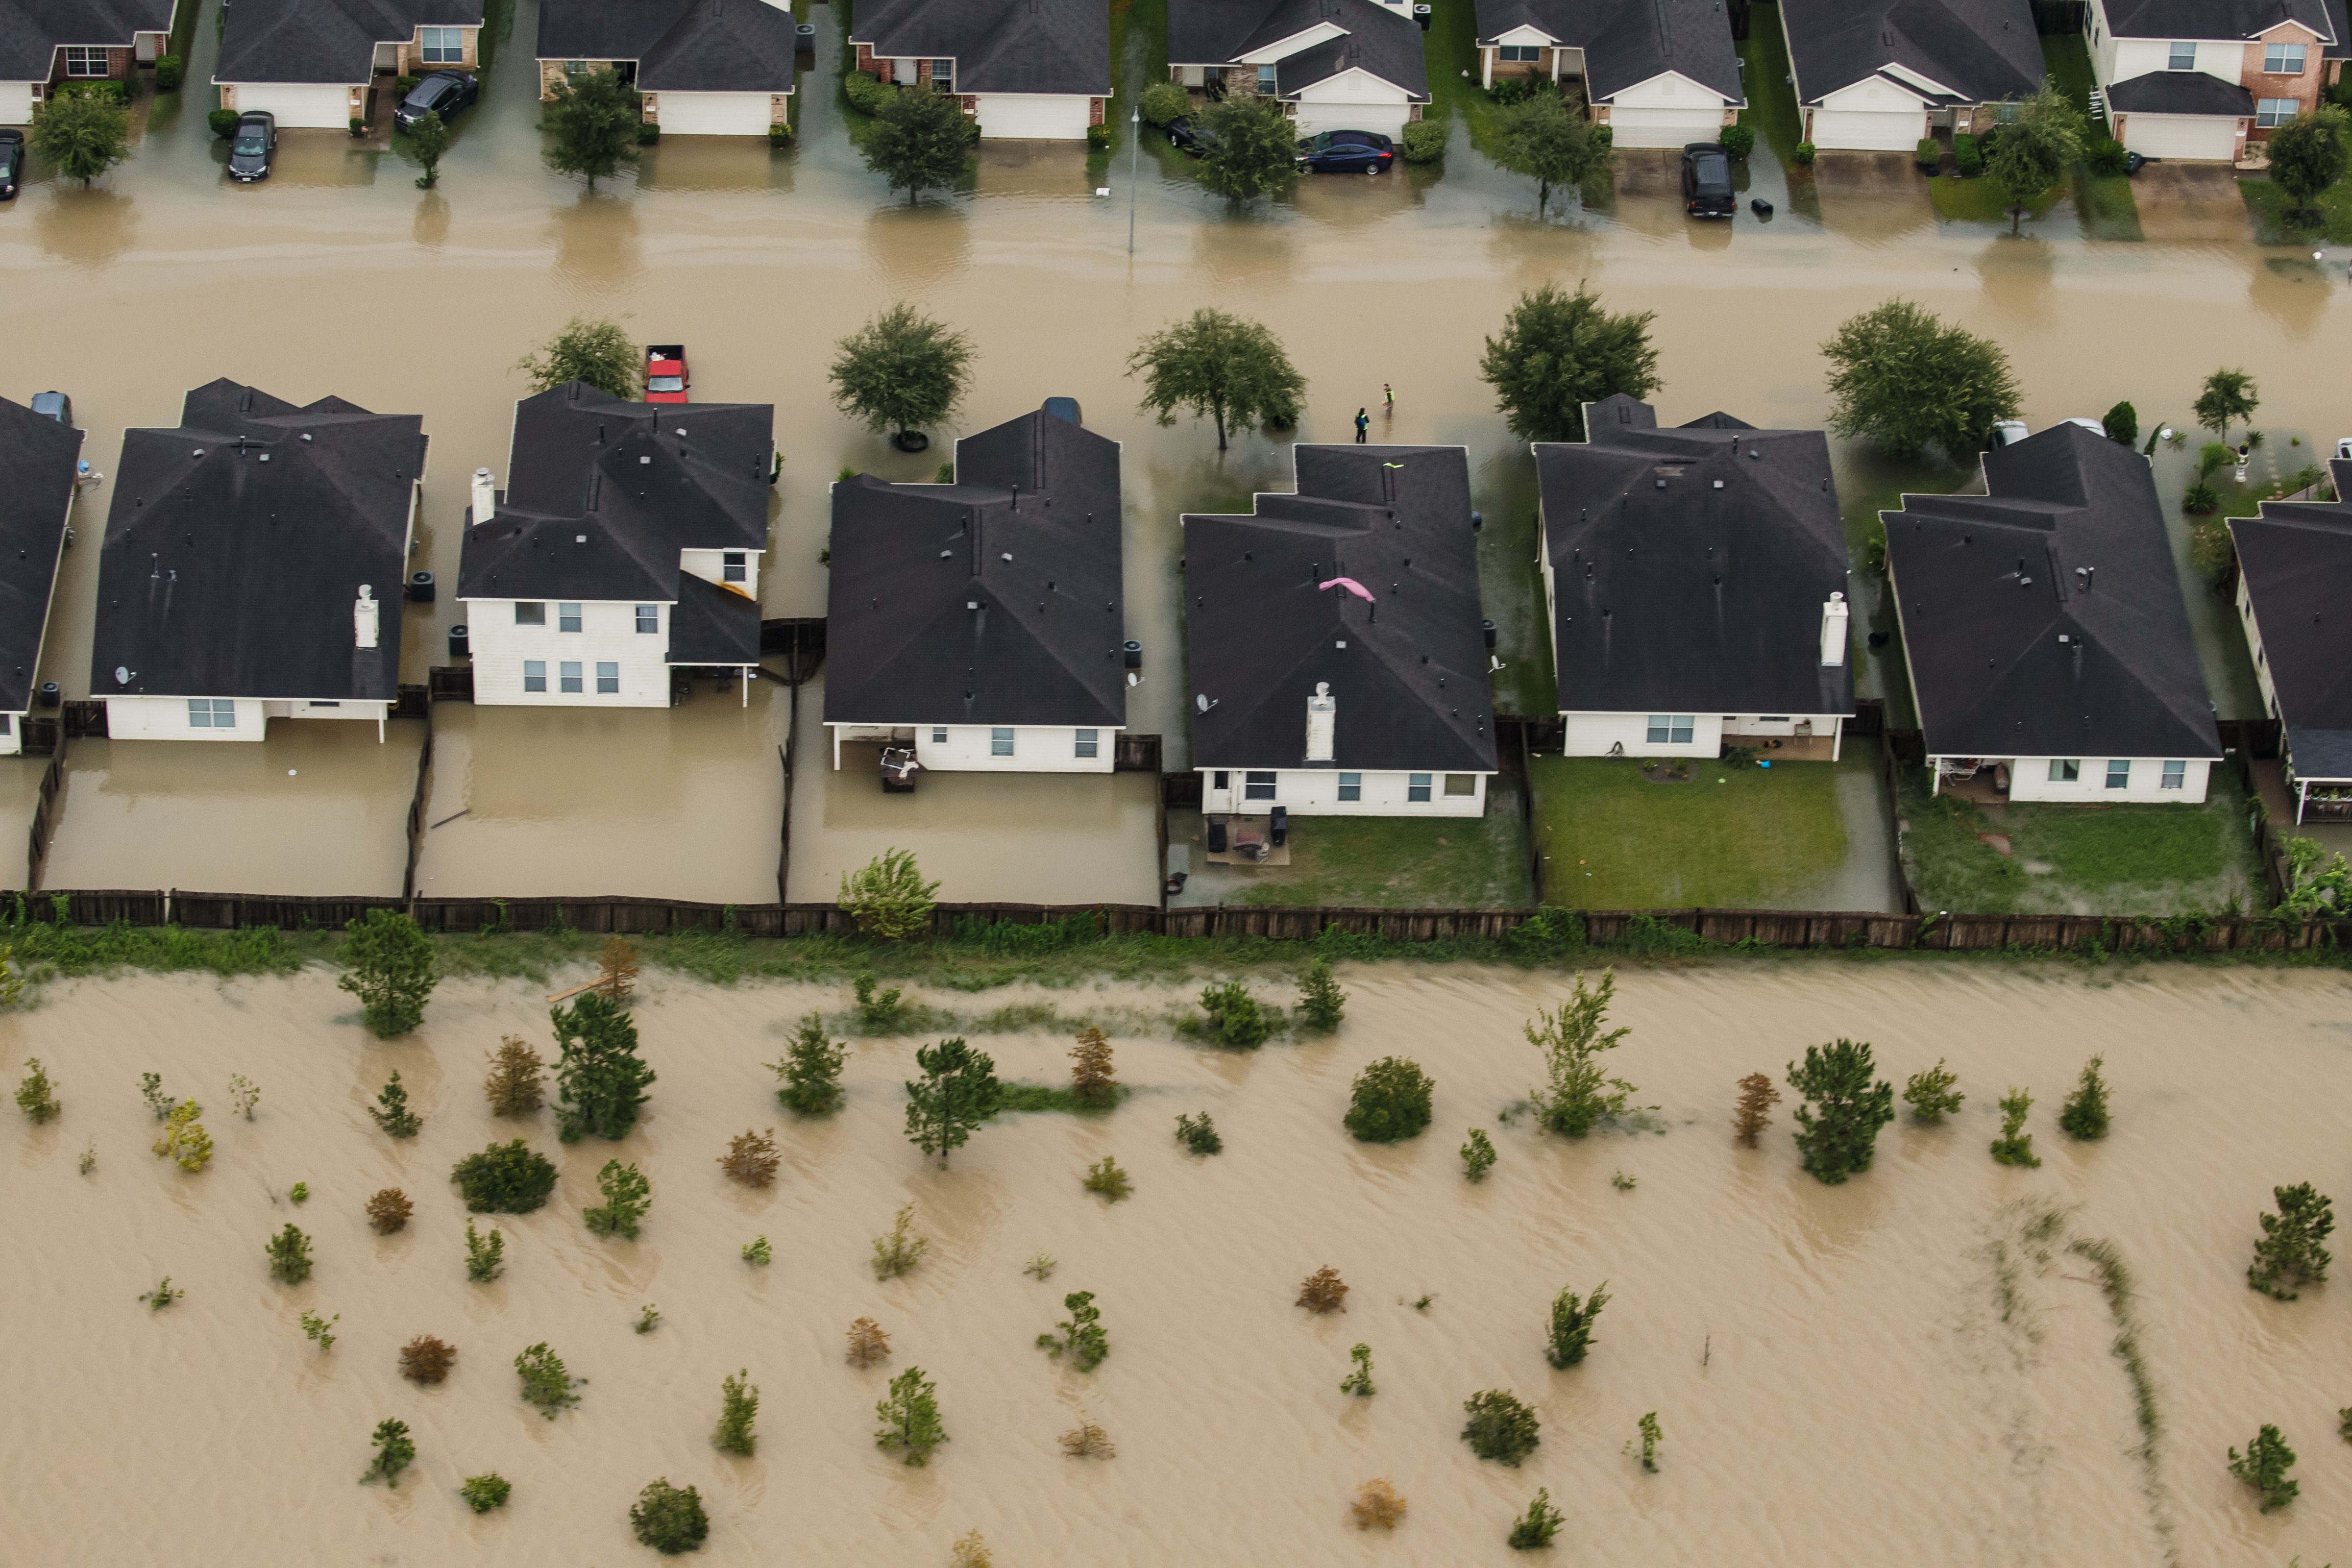 Residential neighborhoods near the Interstate 10 sit in floodwater in the wake of Hurricane Harvey on August 29, 2017  in Houston, Texas. (Marcus Yam&mdash;LA Times/Getty Images)